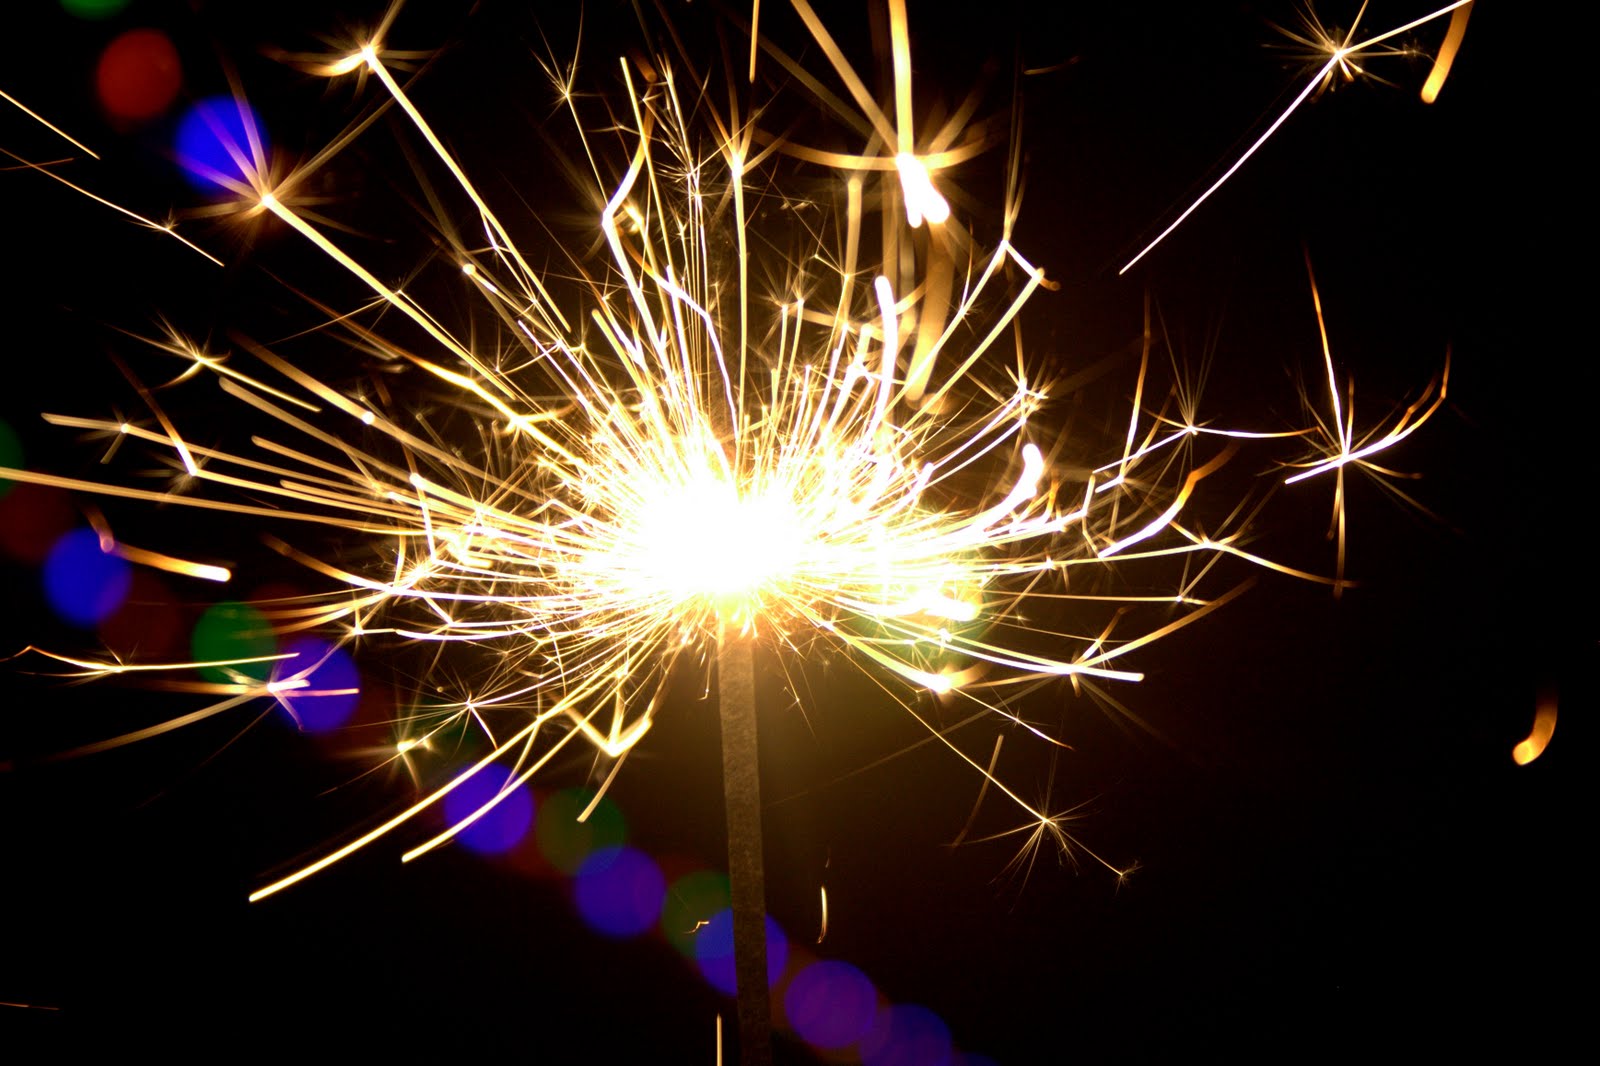 Glimpses Of Purity Pictures Sparklers And Christmas Lights Happy New Year